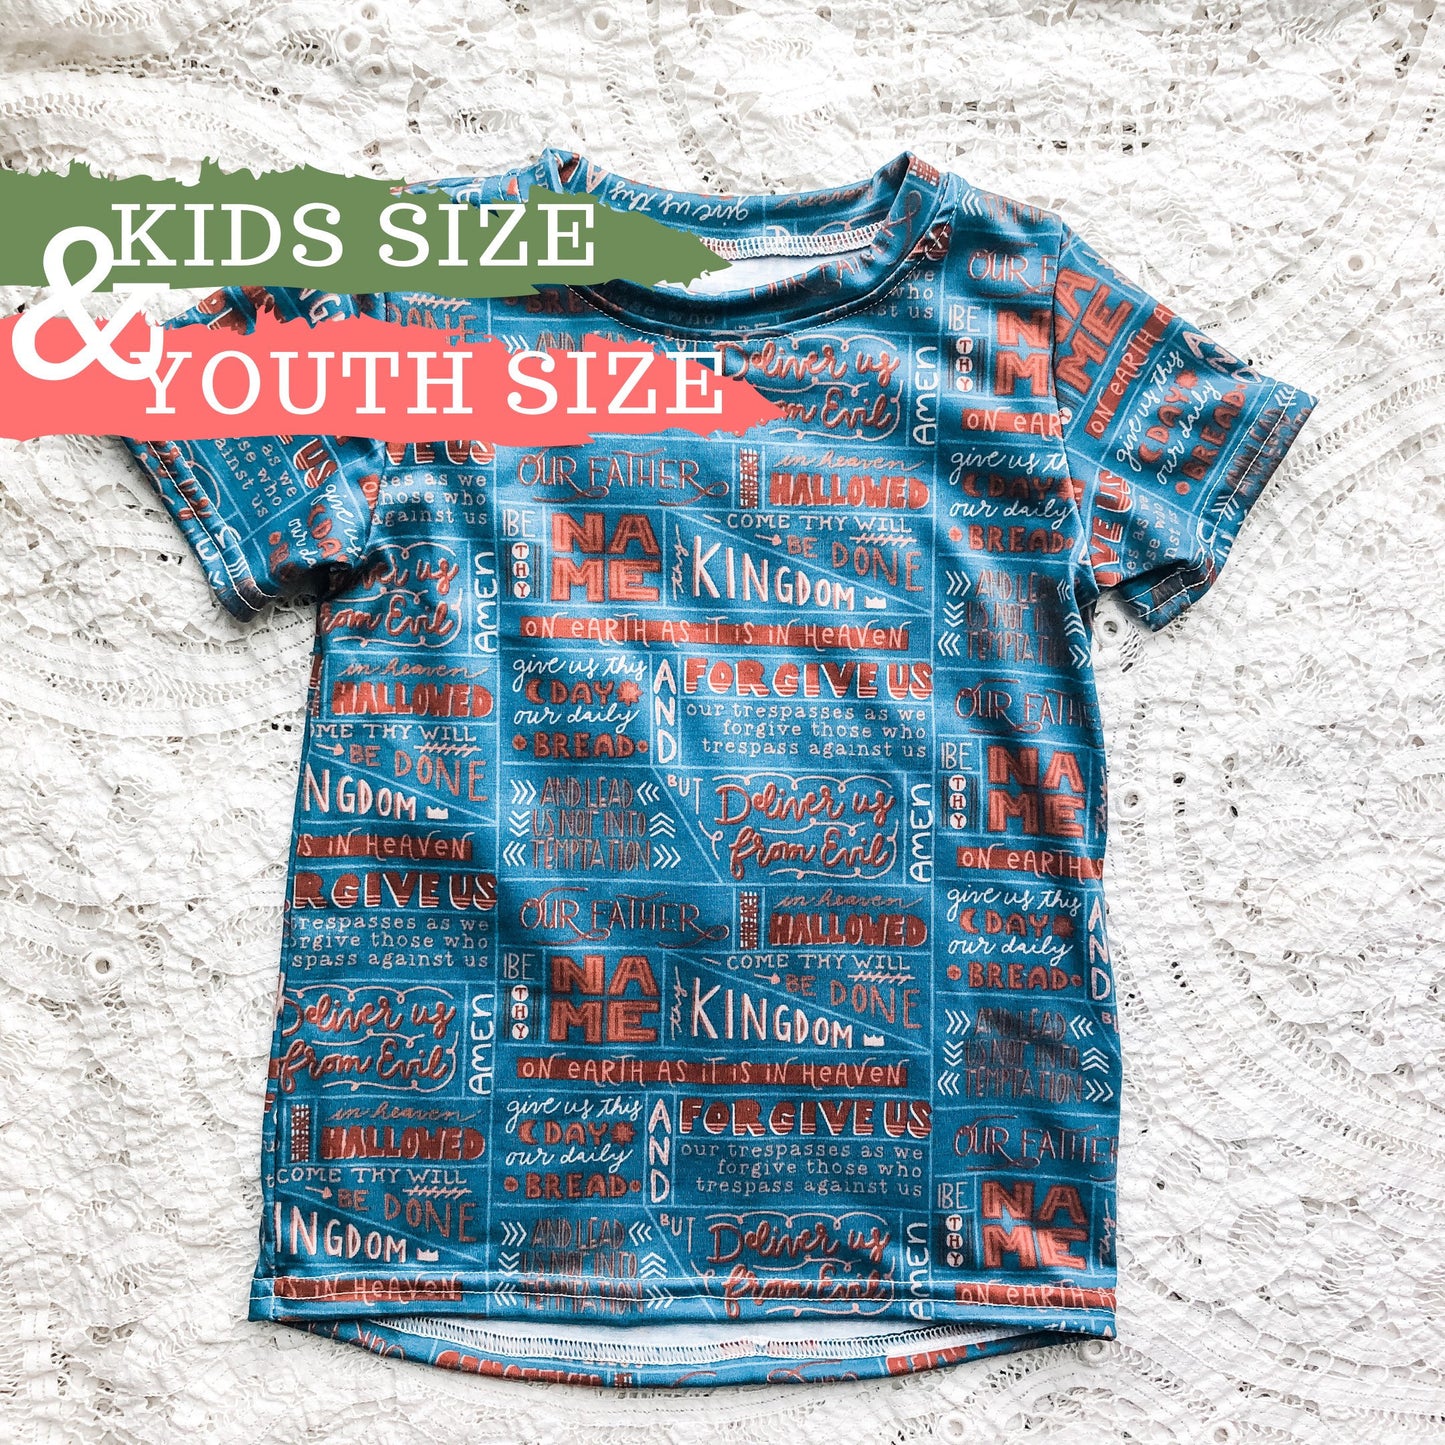 Kids & Youth Our Father Prayer Shirt